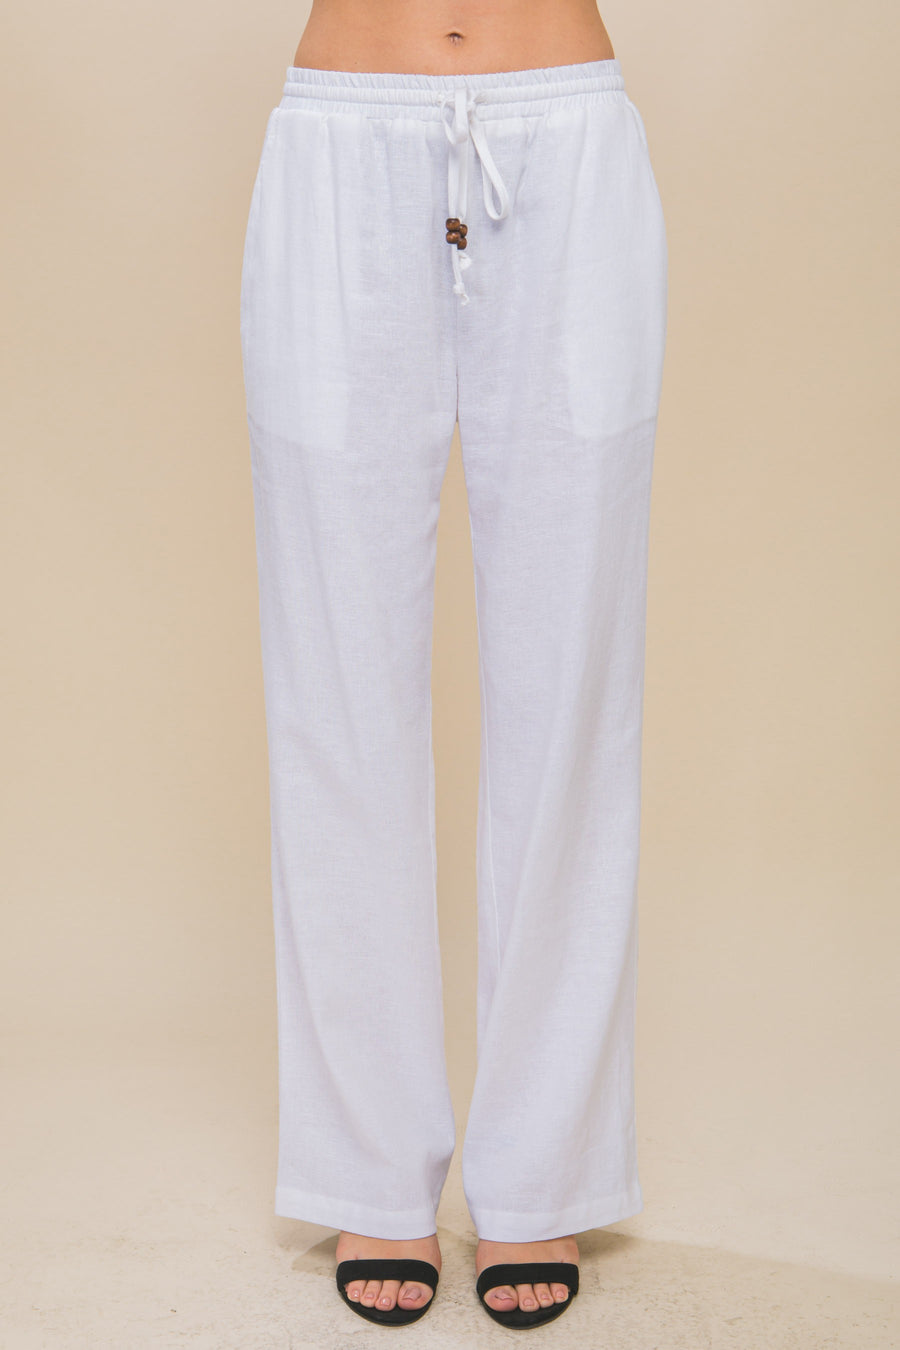 Featuring a straight leg linen pant with an elastic waist band and a tie front with added beaded detail in the color white 